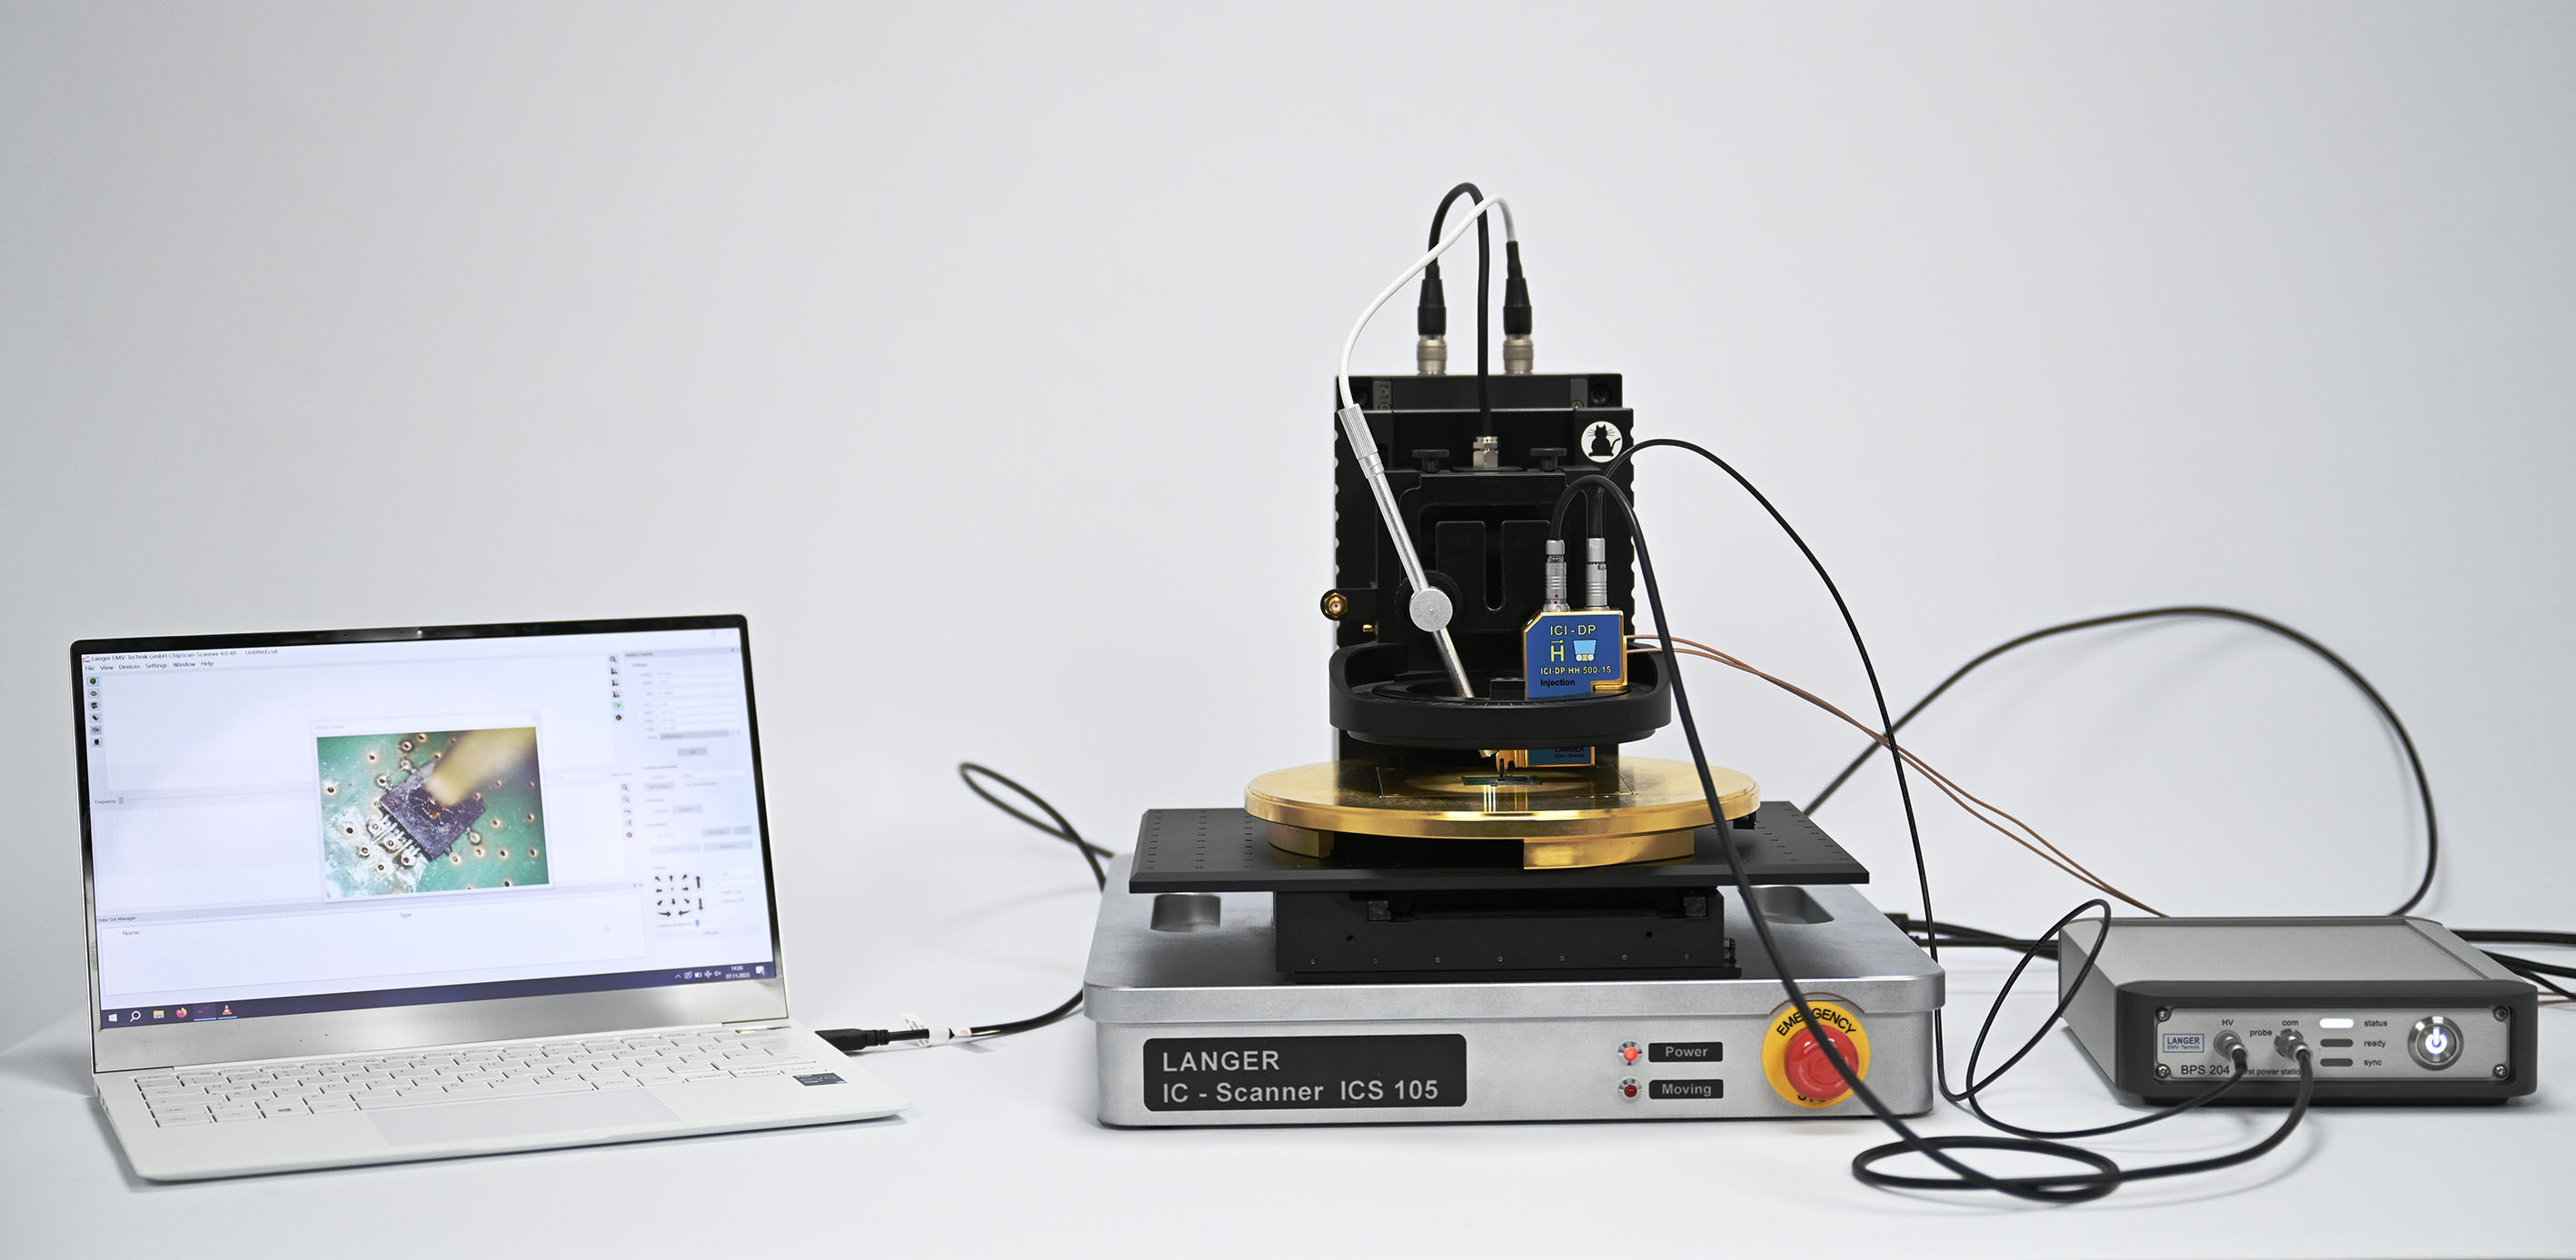 Fault injection measuring station with Langer IC scanner